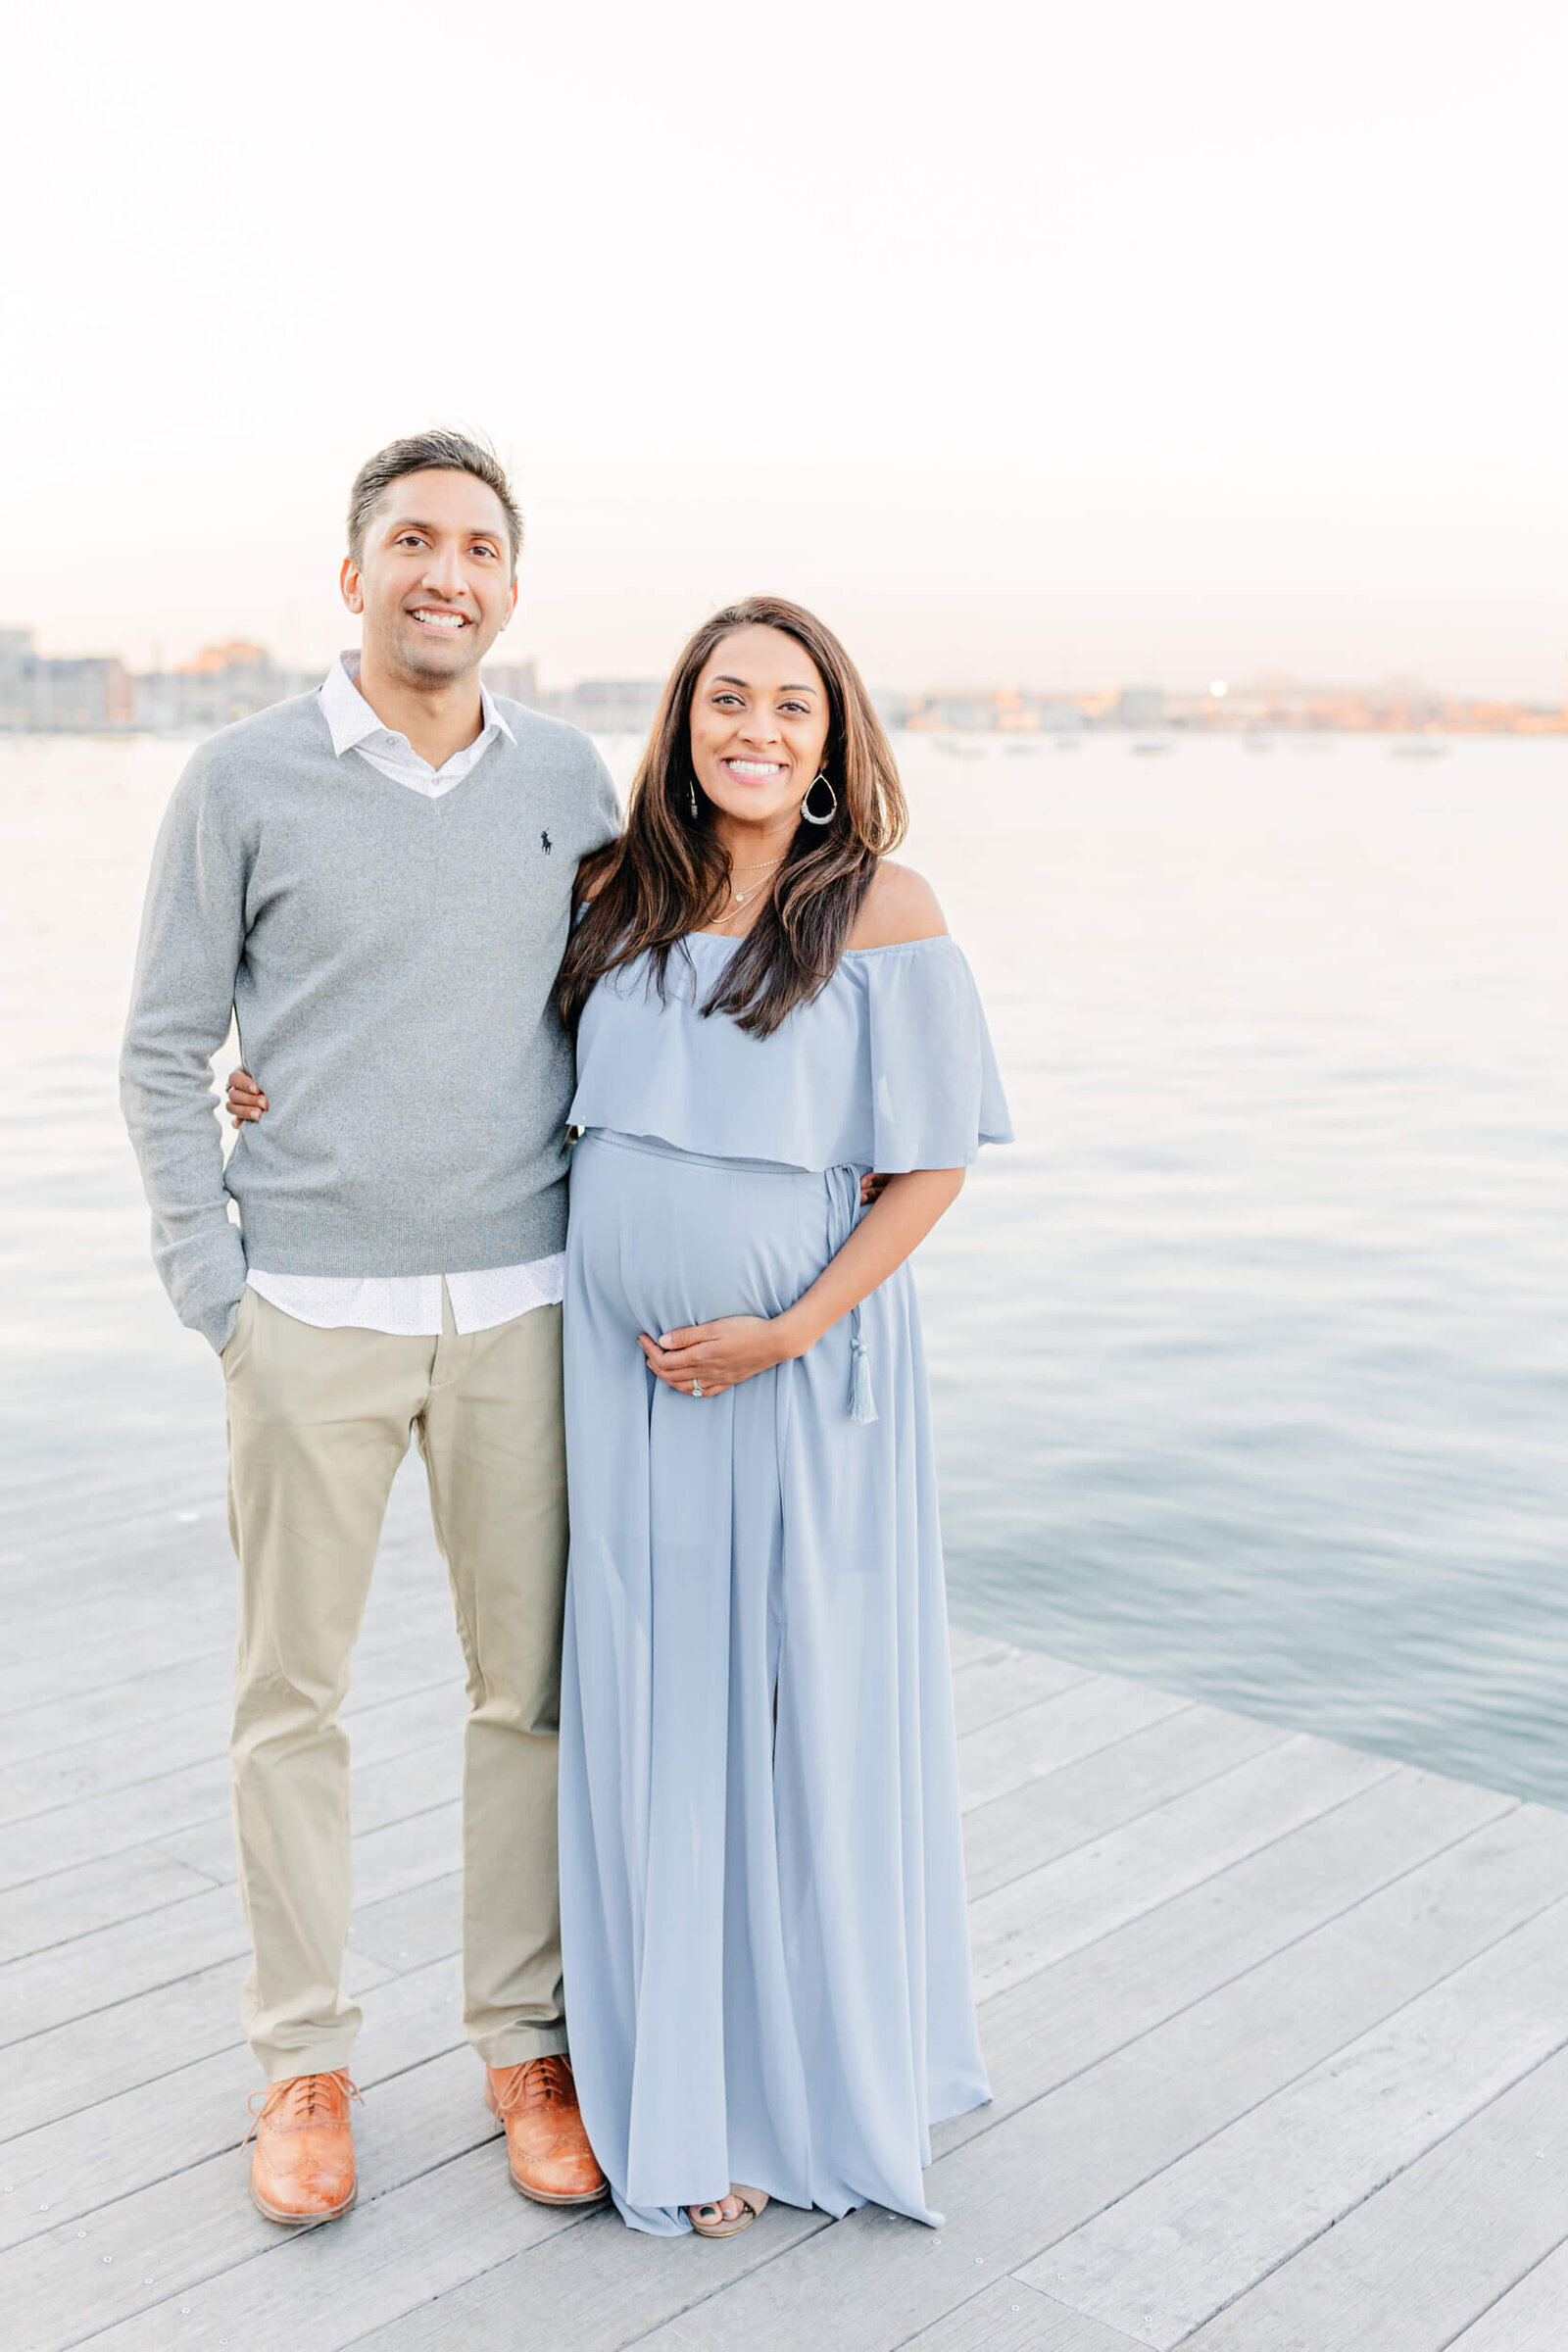 Pregnant woman and her husband smile in front of Boston Harbor